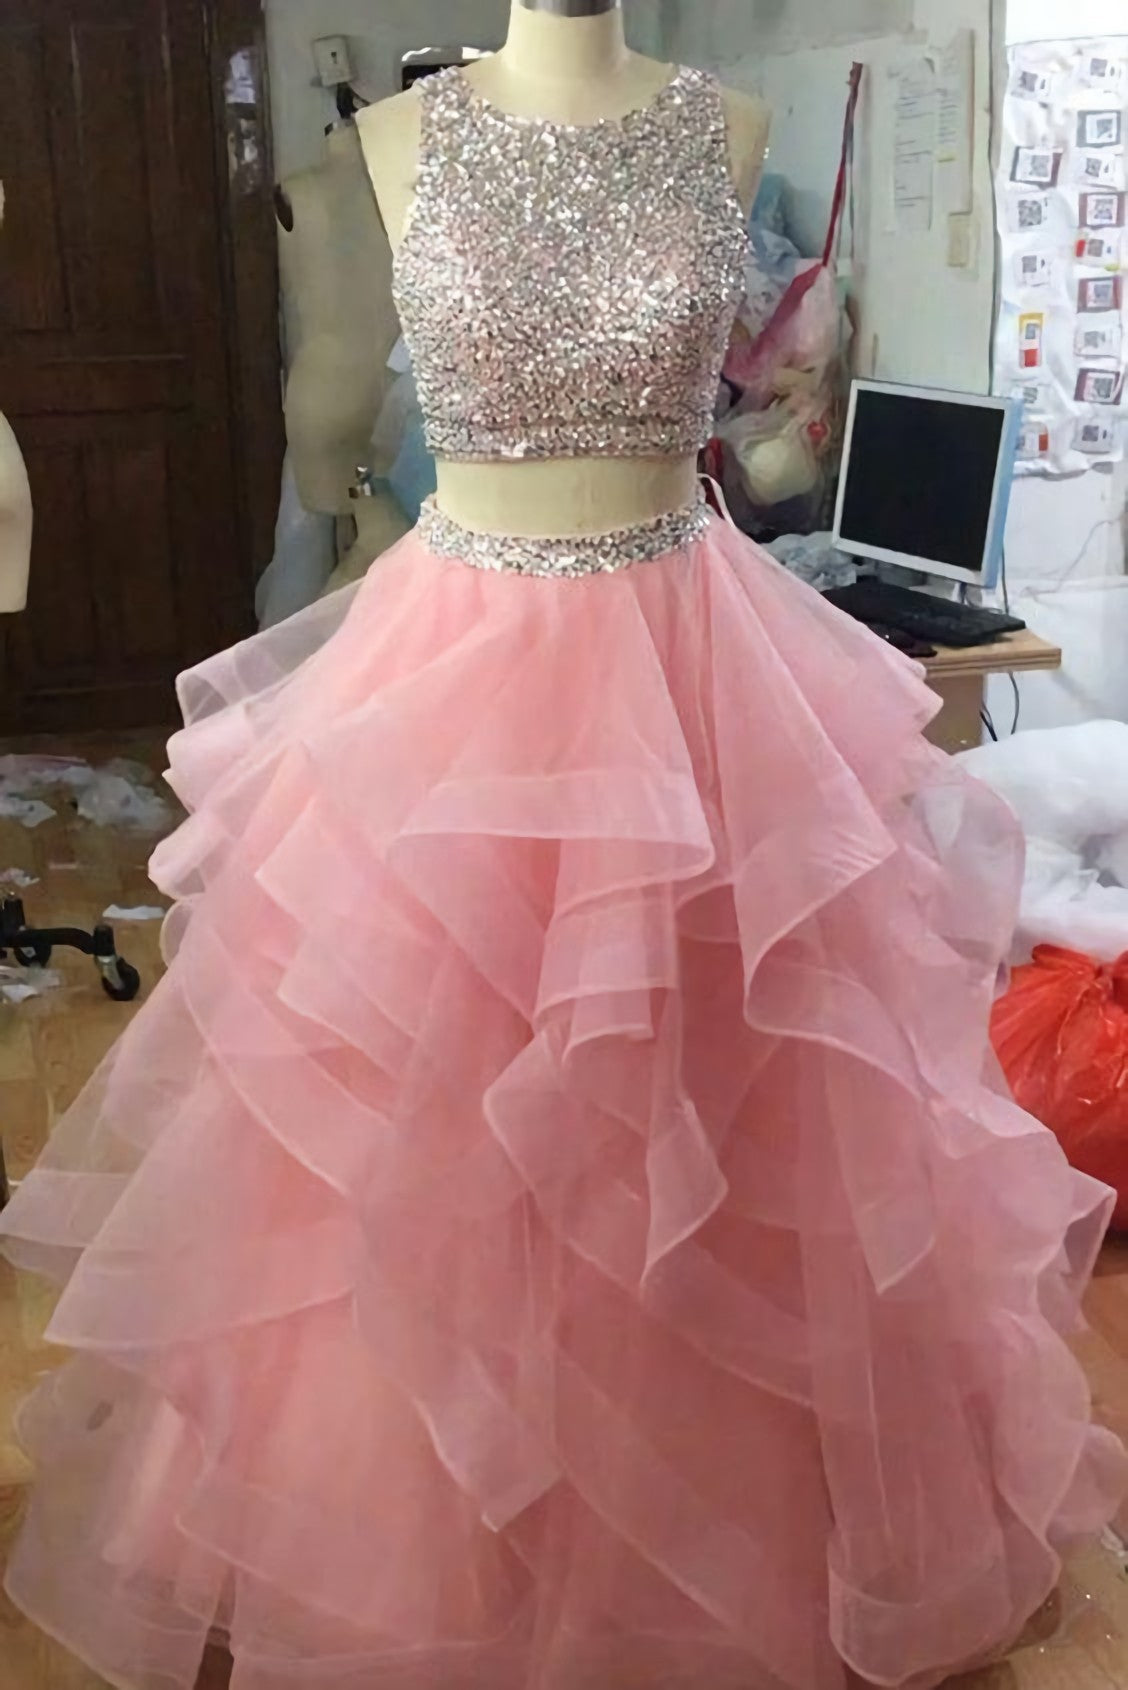 Jewel Neck Pink Party Dresses, Sequins And Beaded 2 Pieces Prom Dresses, Ruffle And Tiered Tulle Affordable Evening Dresses